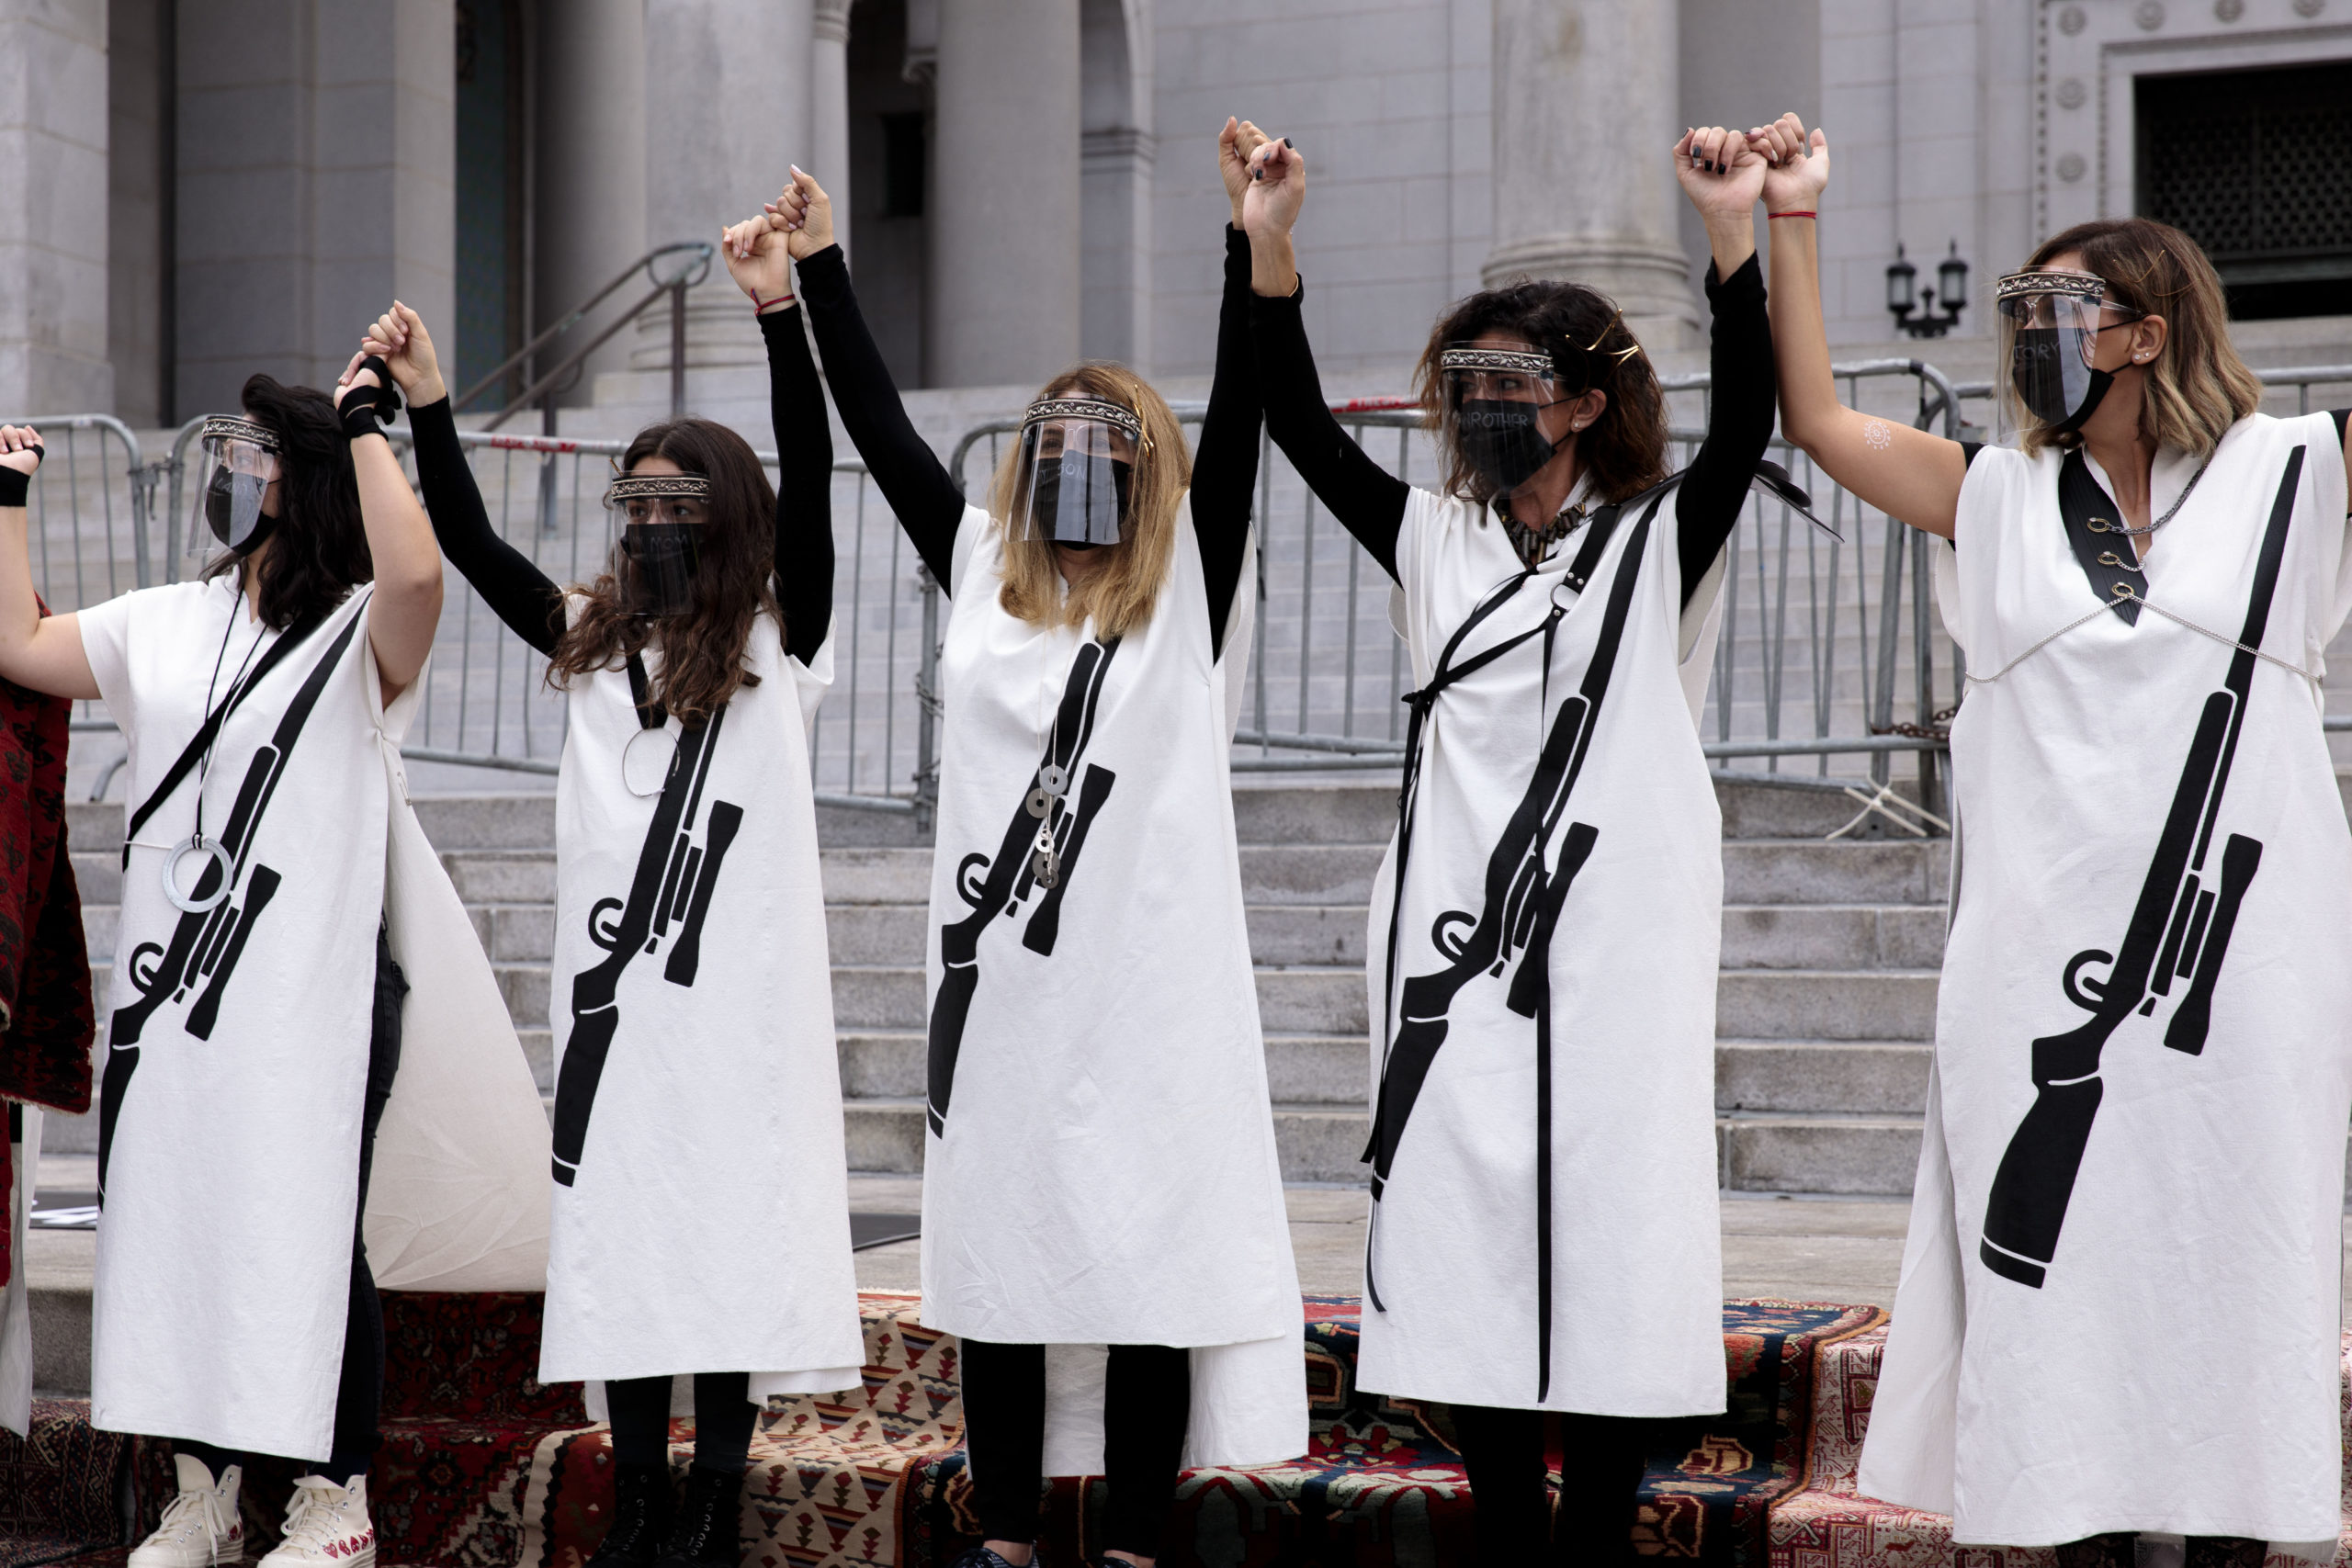 Five women wearing white dresses with a graphic of a gun on them, holding hands with their arms raised in the air.